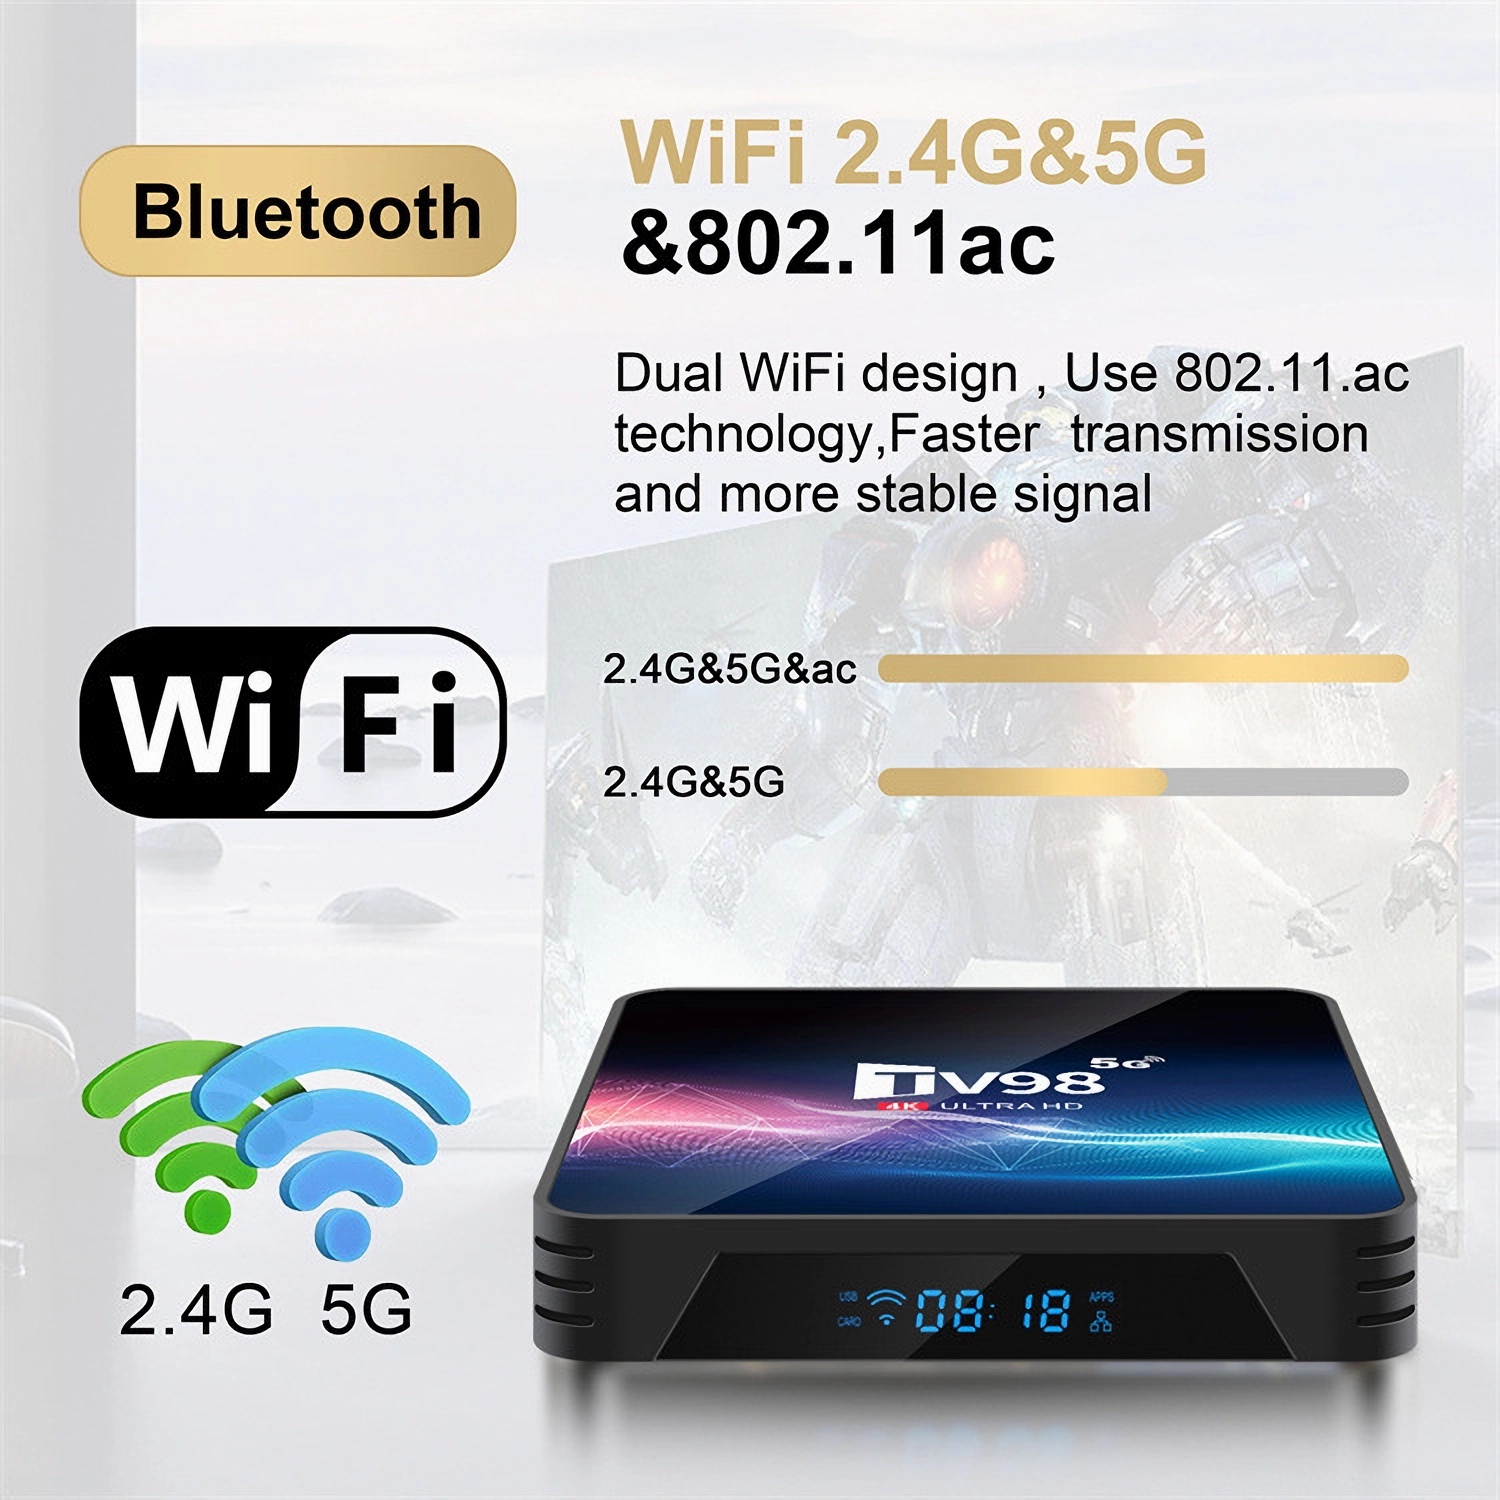 Ultimative 2GB+16GB Android WiFi, 4K Box BRIGHTAKE - Box TV Dual-Band Android TV